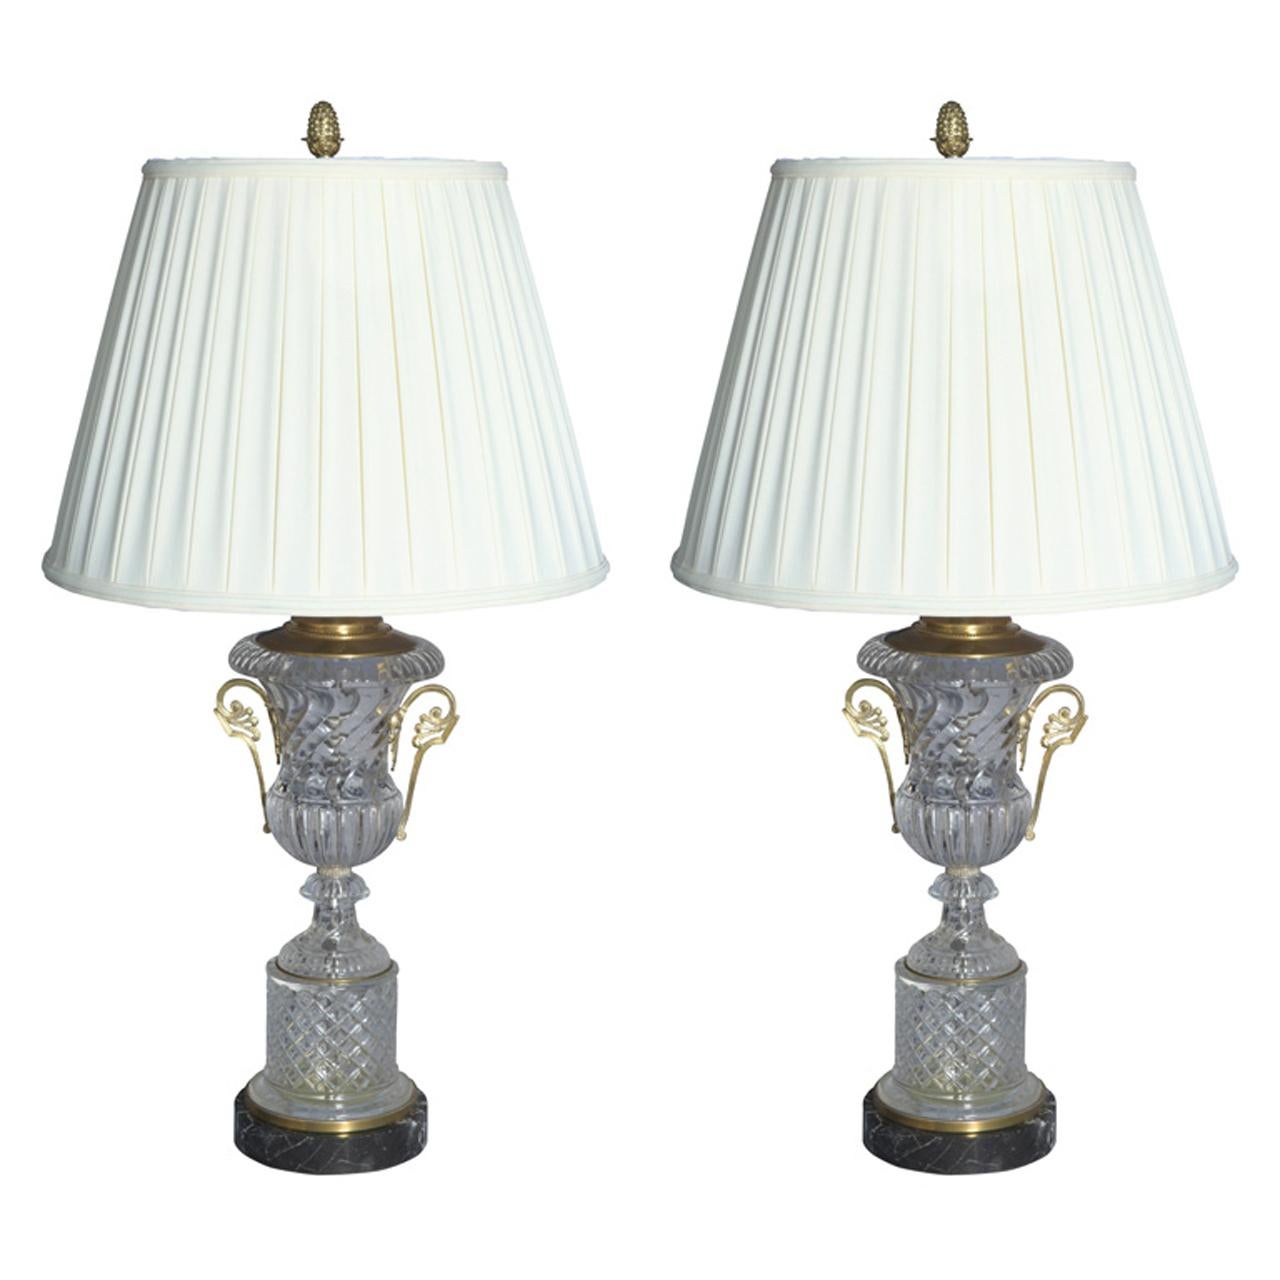 Late 20th Century Pair of Baccarat Spiral Urn Glass Lamps For Sale